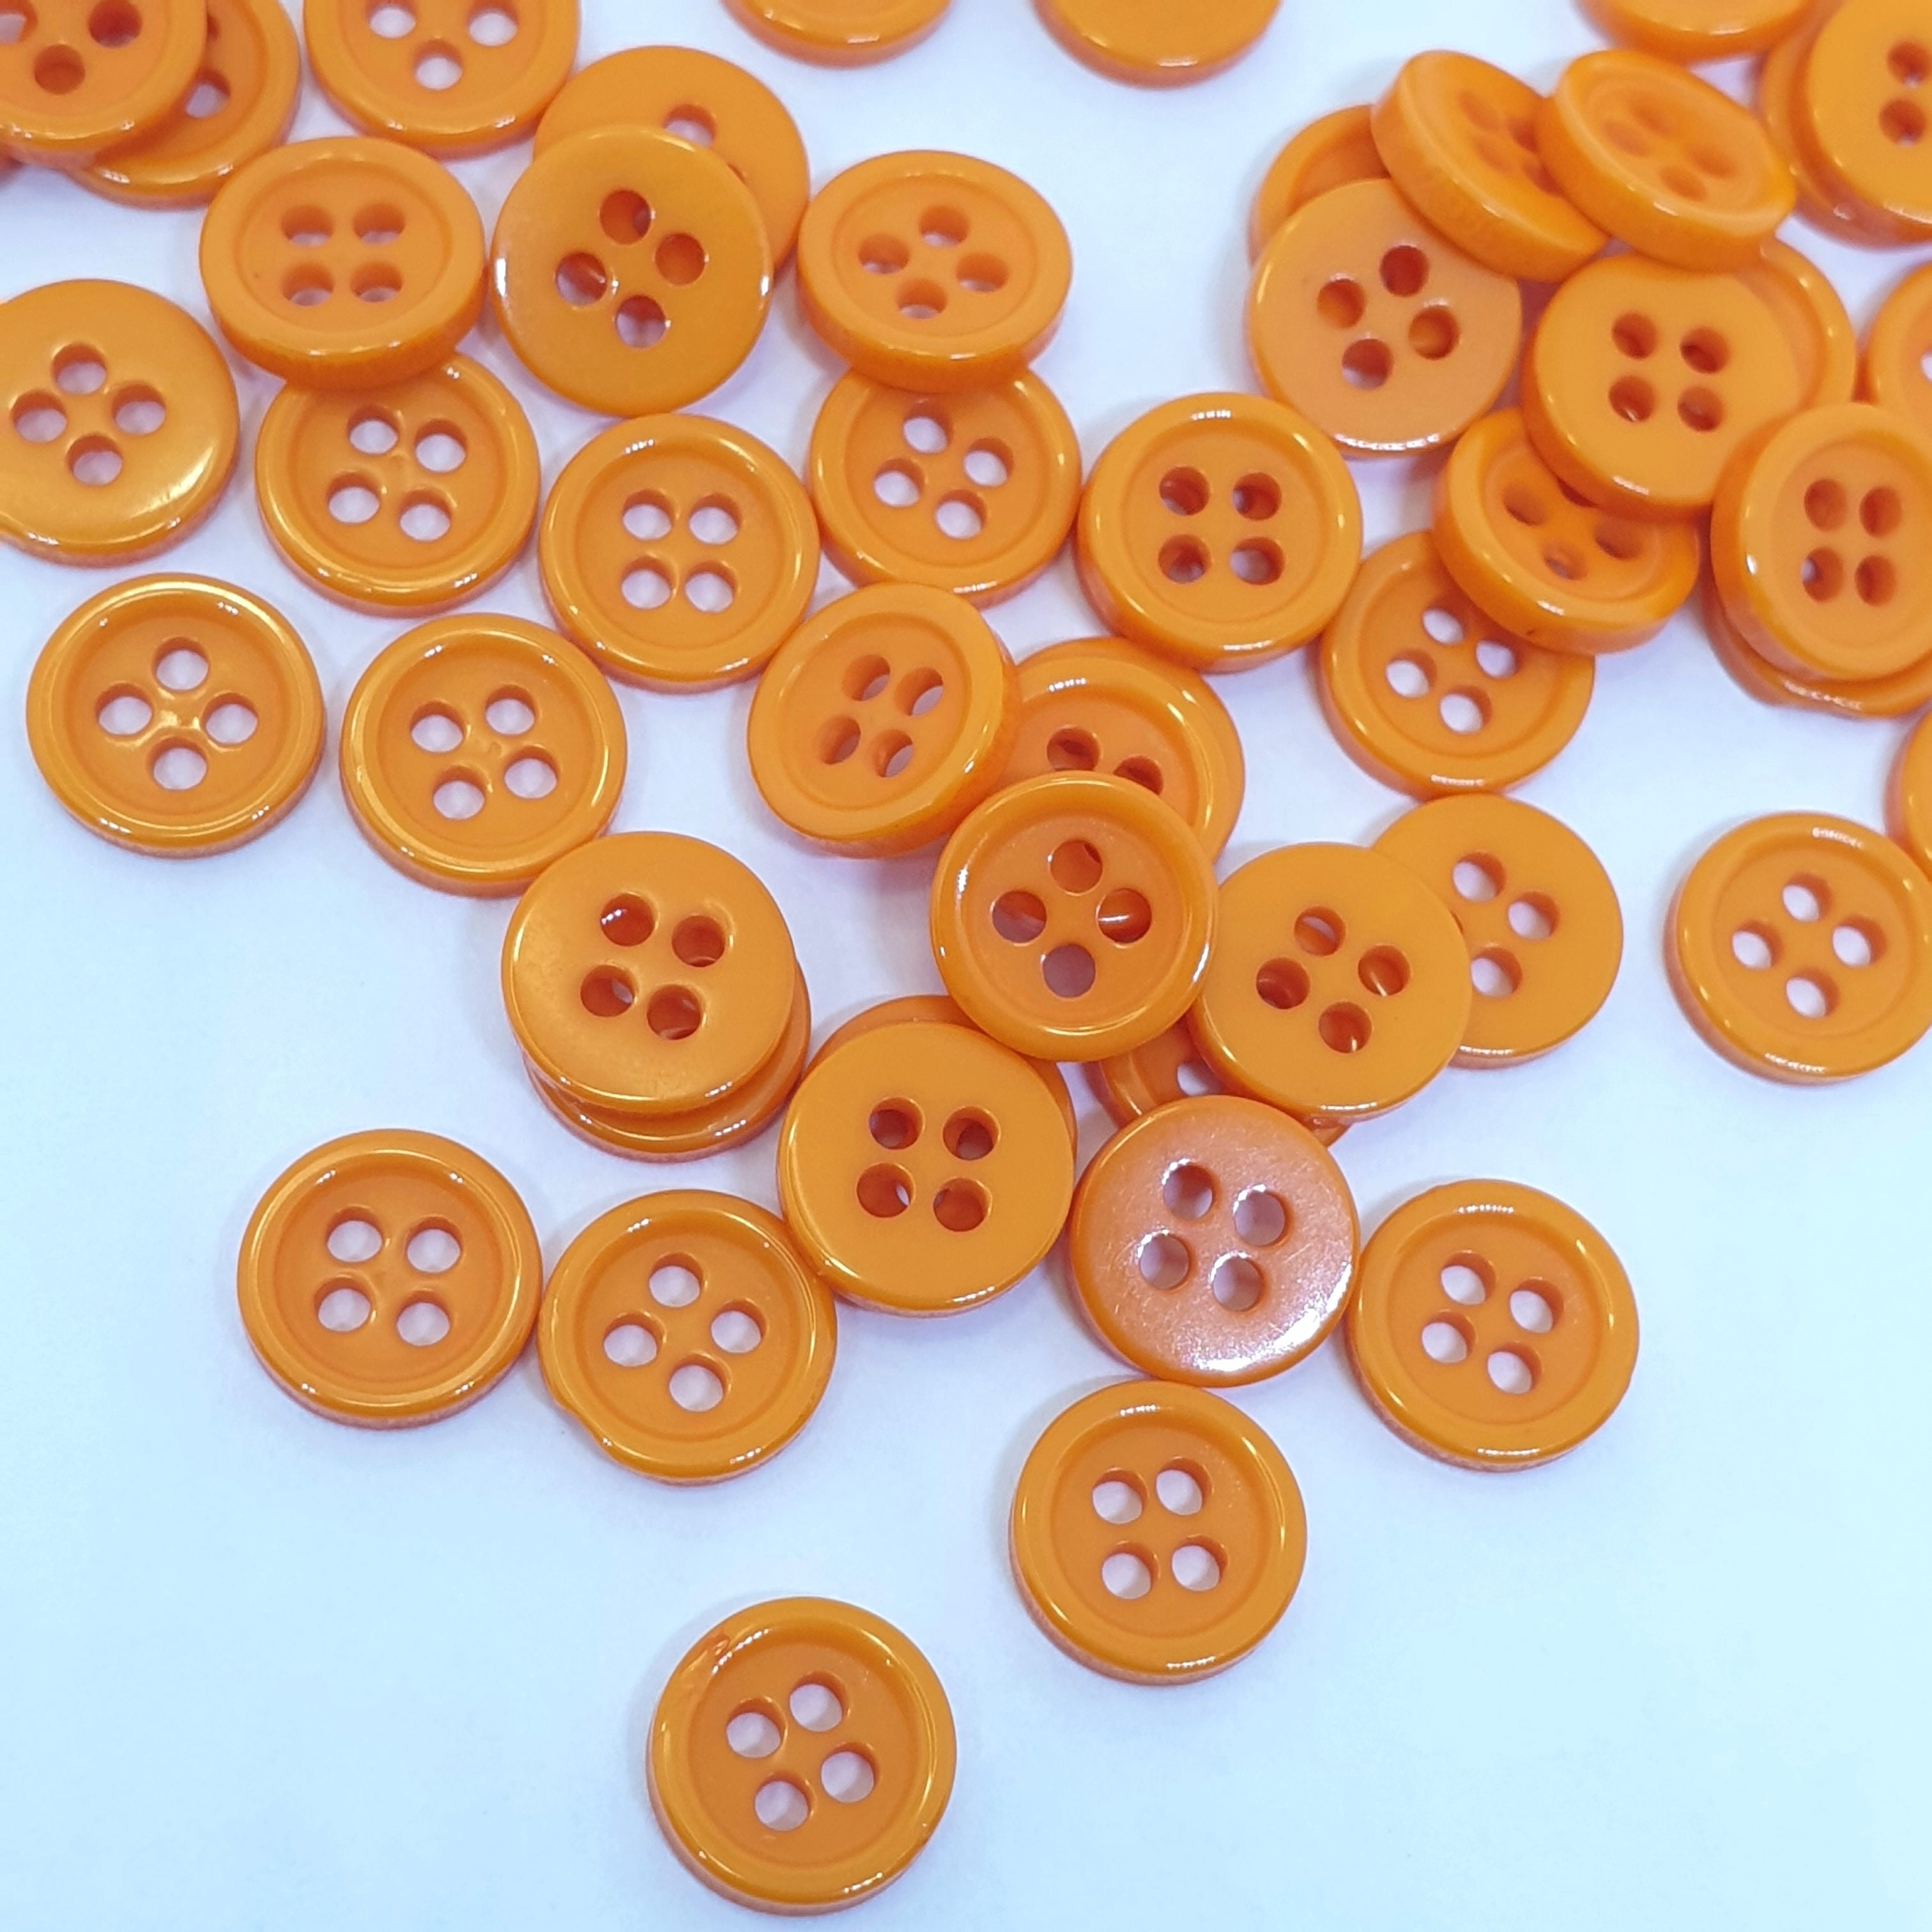 MajorCrafts 120pcs 9mm Orange 4 Holes Small Round Resin Sewing Buttons